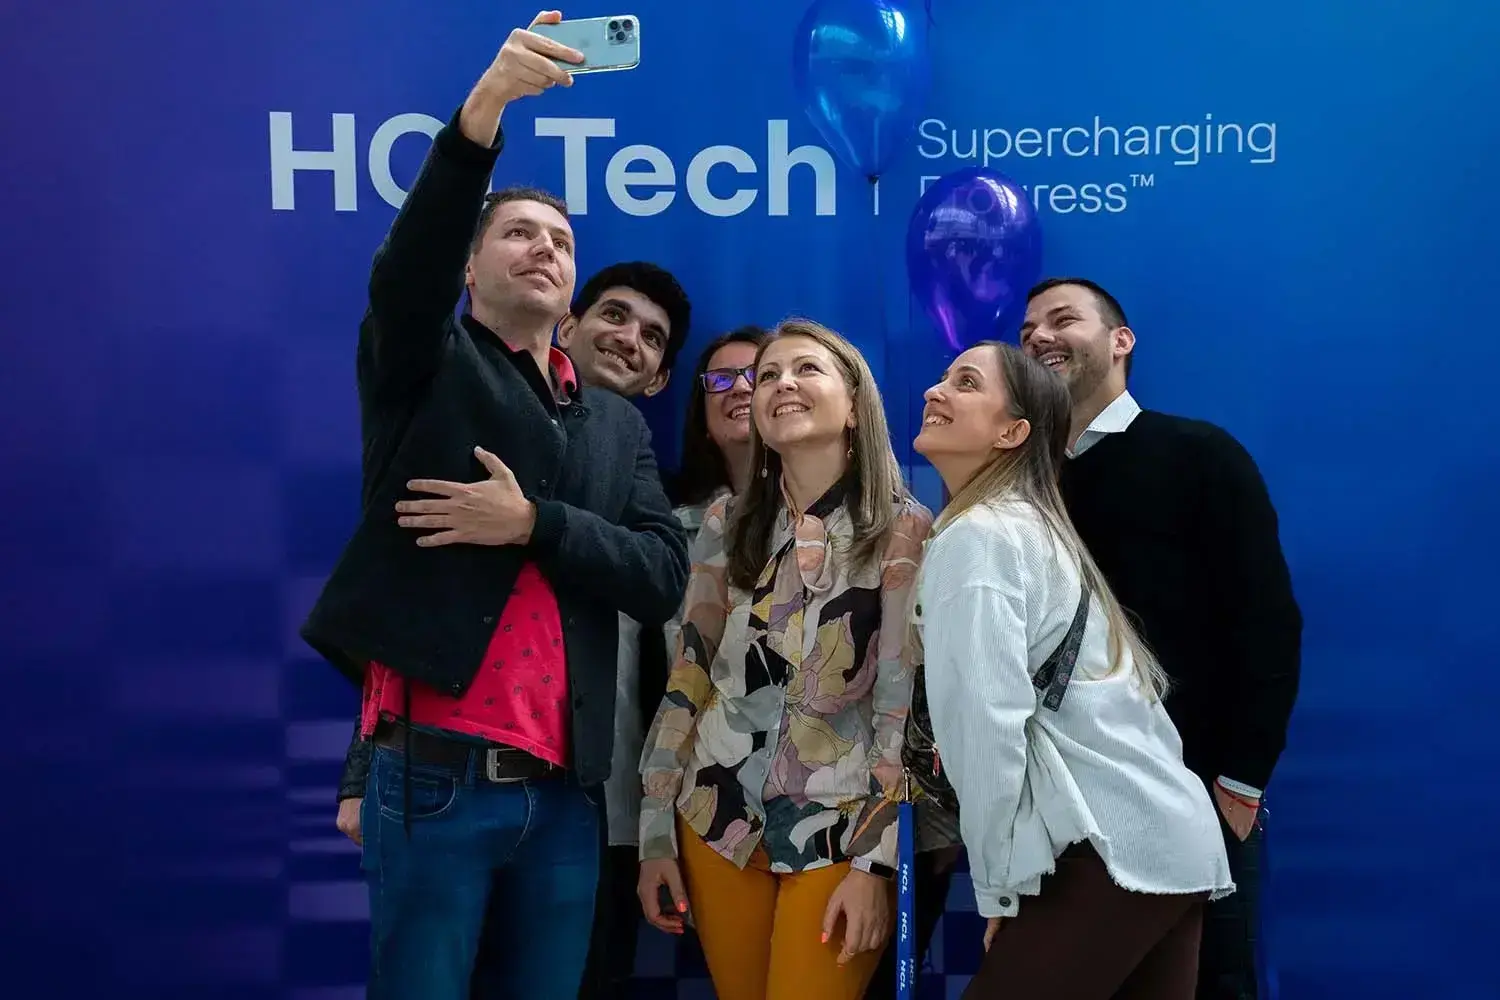 Posing together at HCLTech Brand Transformation event in Sofia